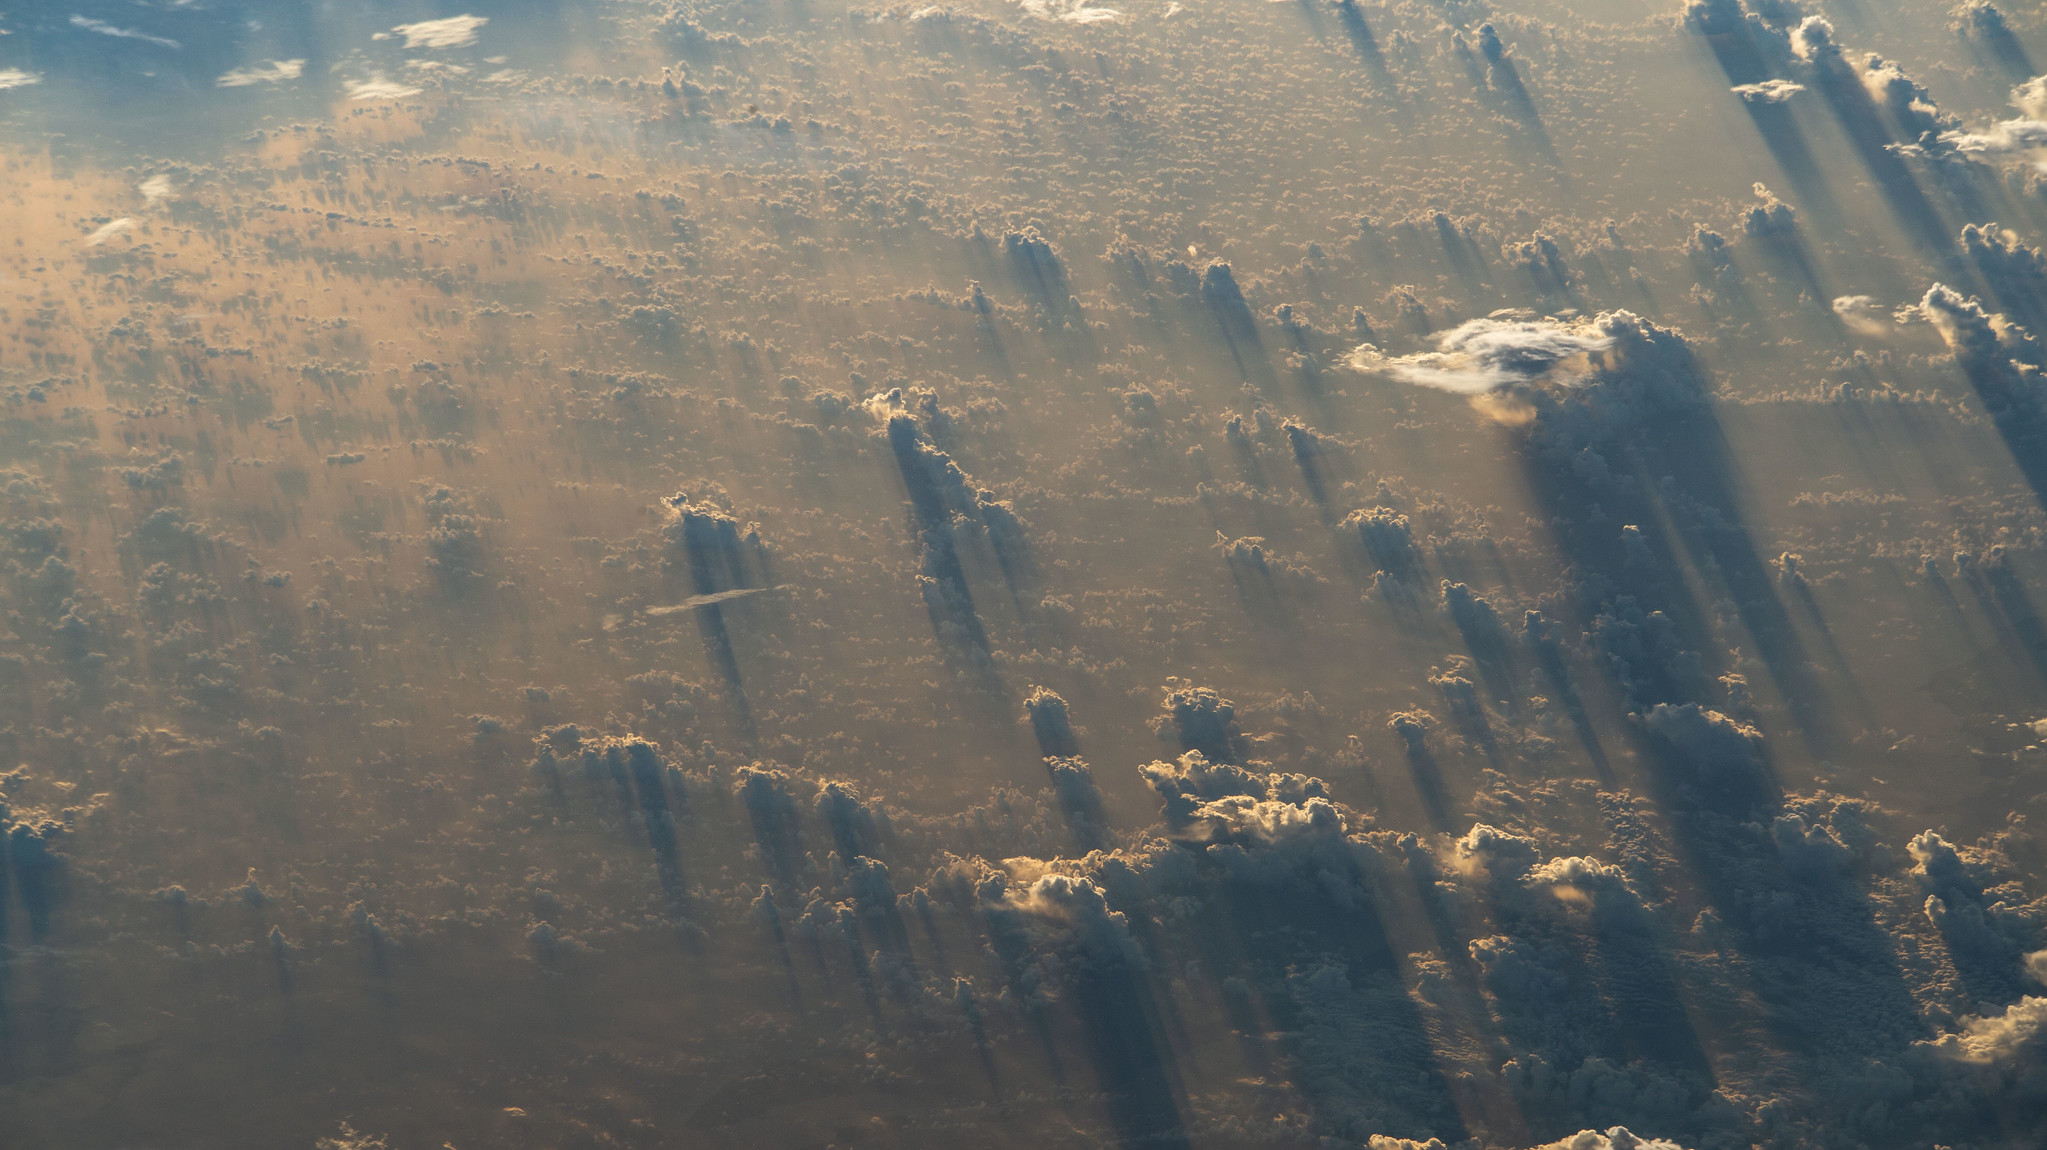 image of clouds seen on Earth taken from the space station